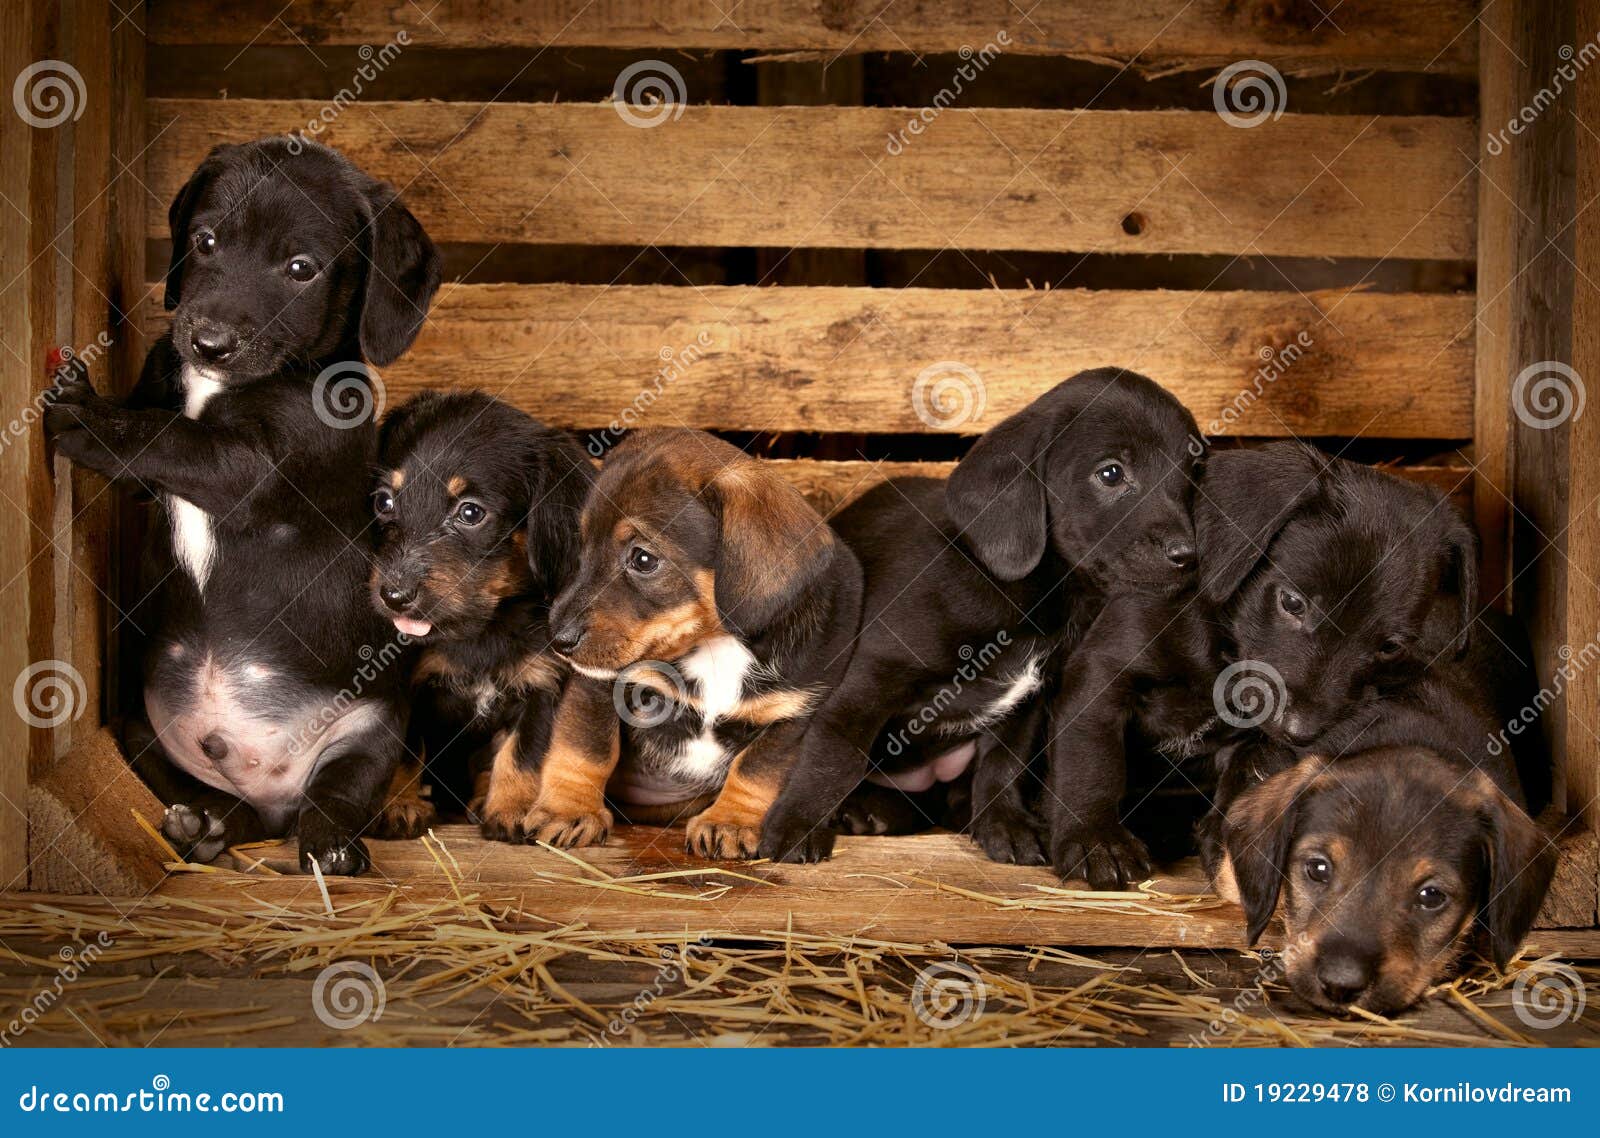 Dachshund Puppies 3 Weeks Old Stock Photo - Image of ...